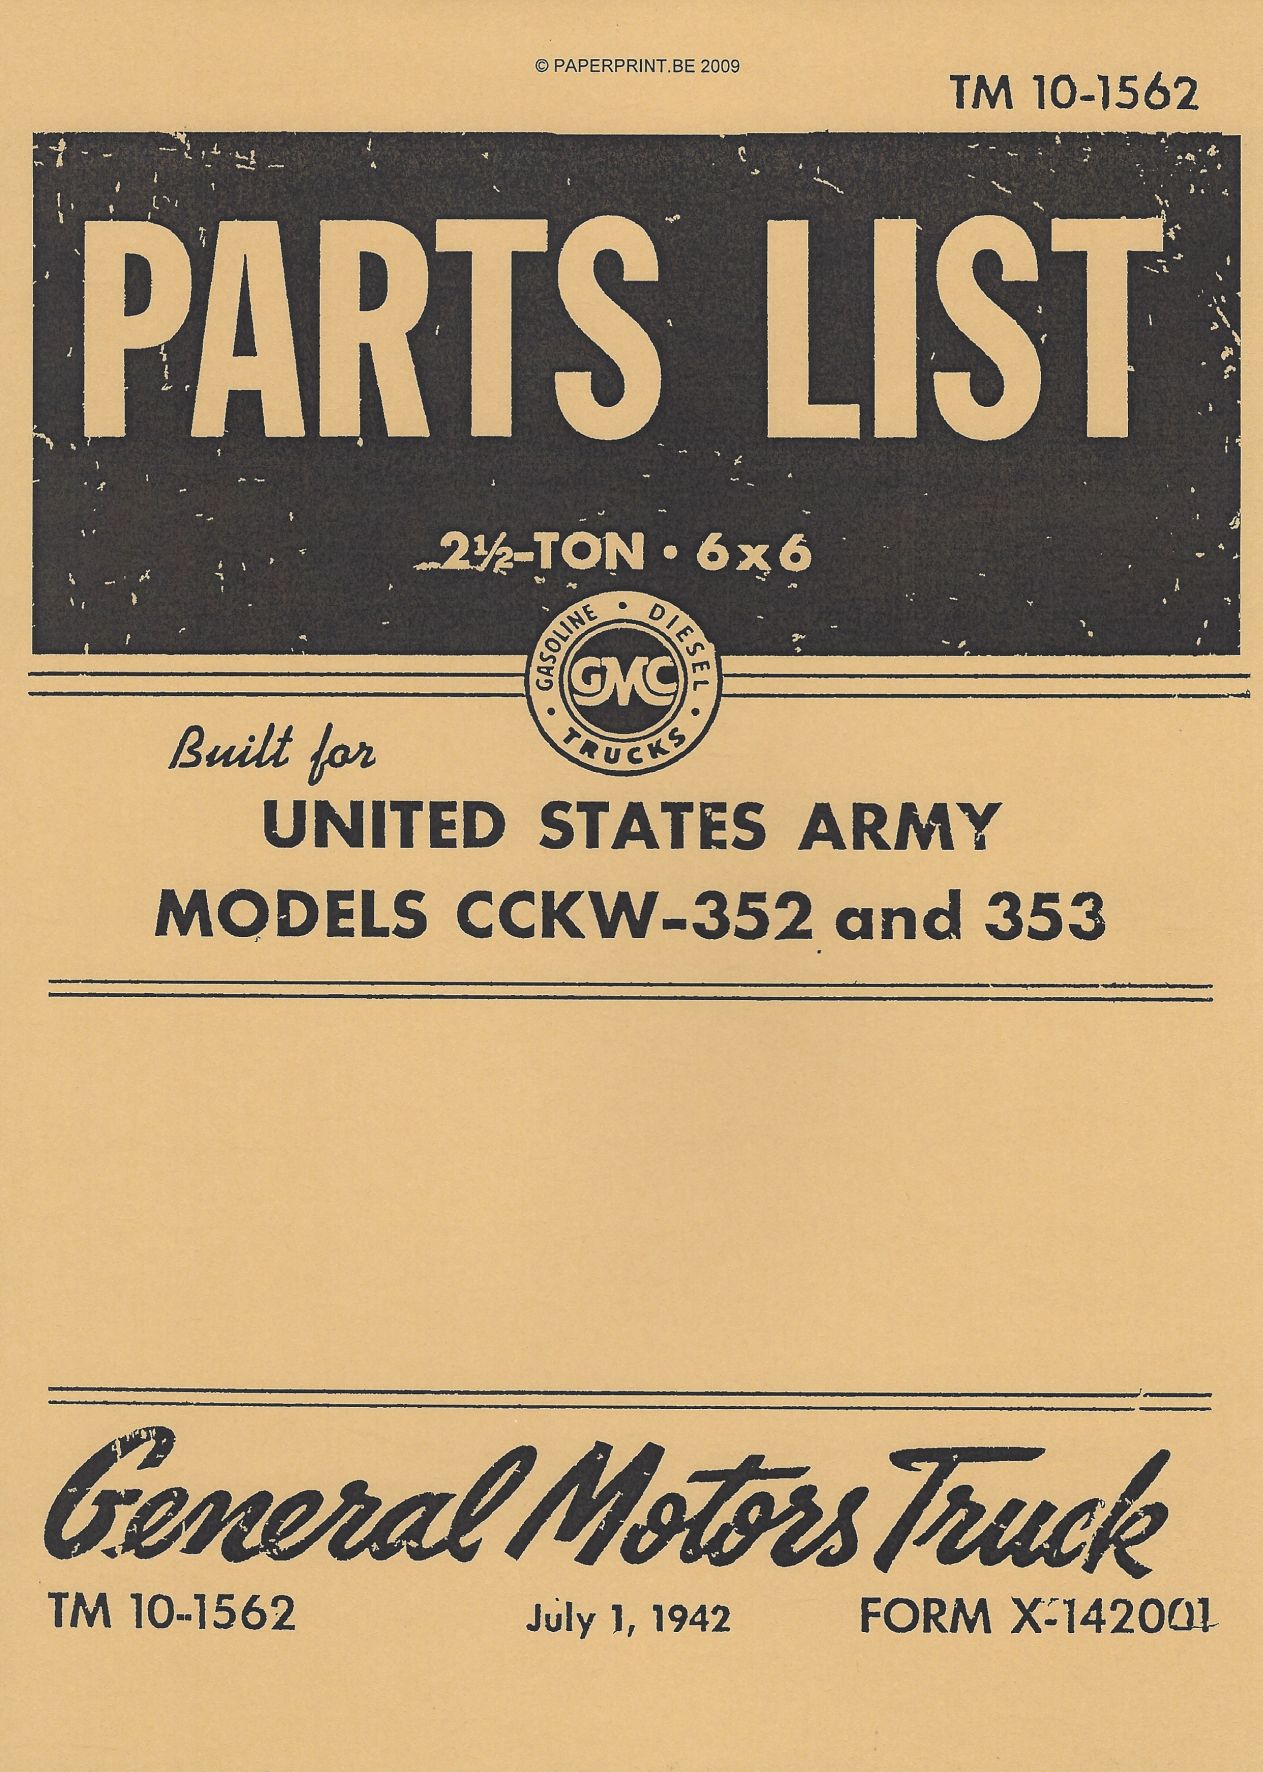 TM 10-1562 US PARTS LIST FOR MODELS CCKW-352 AND 352